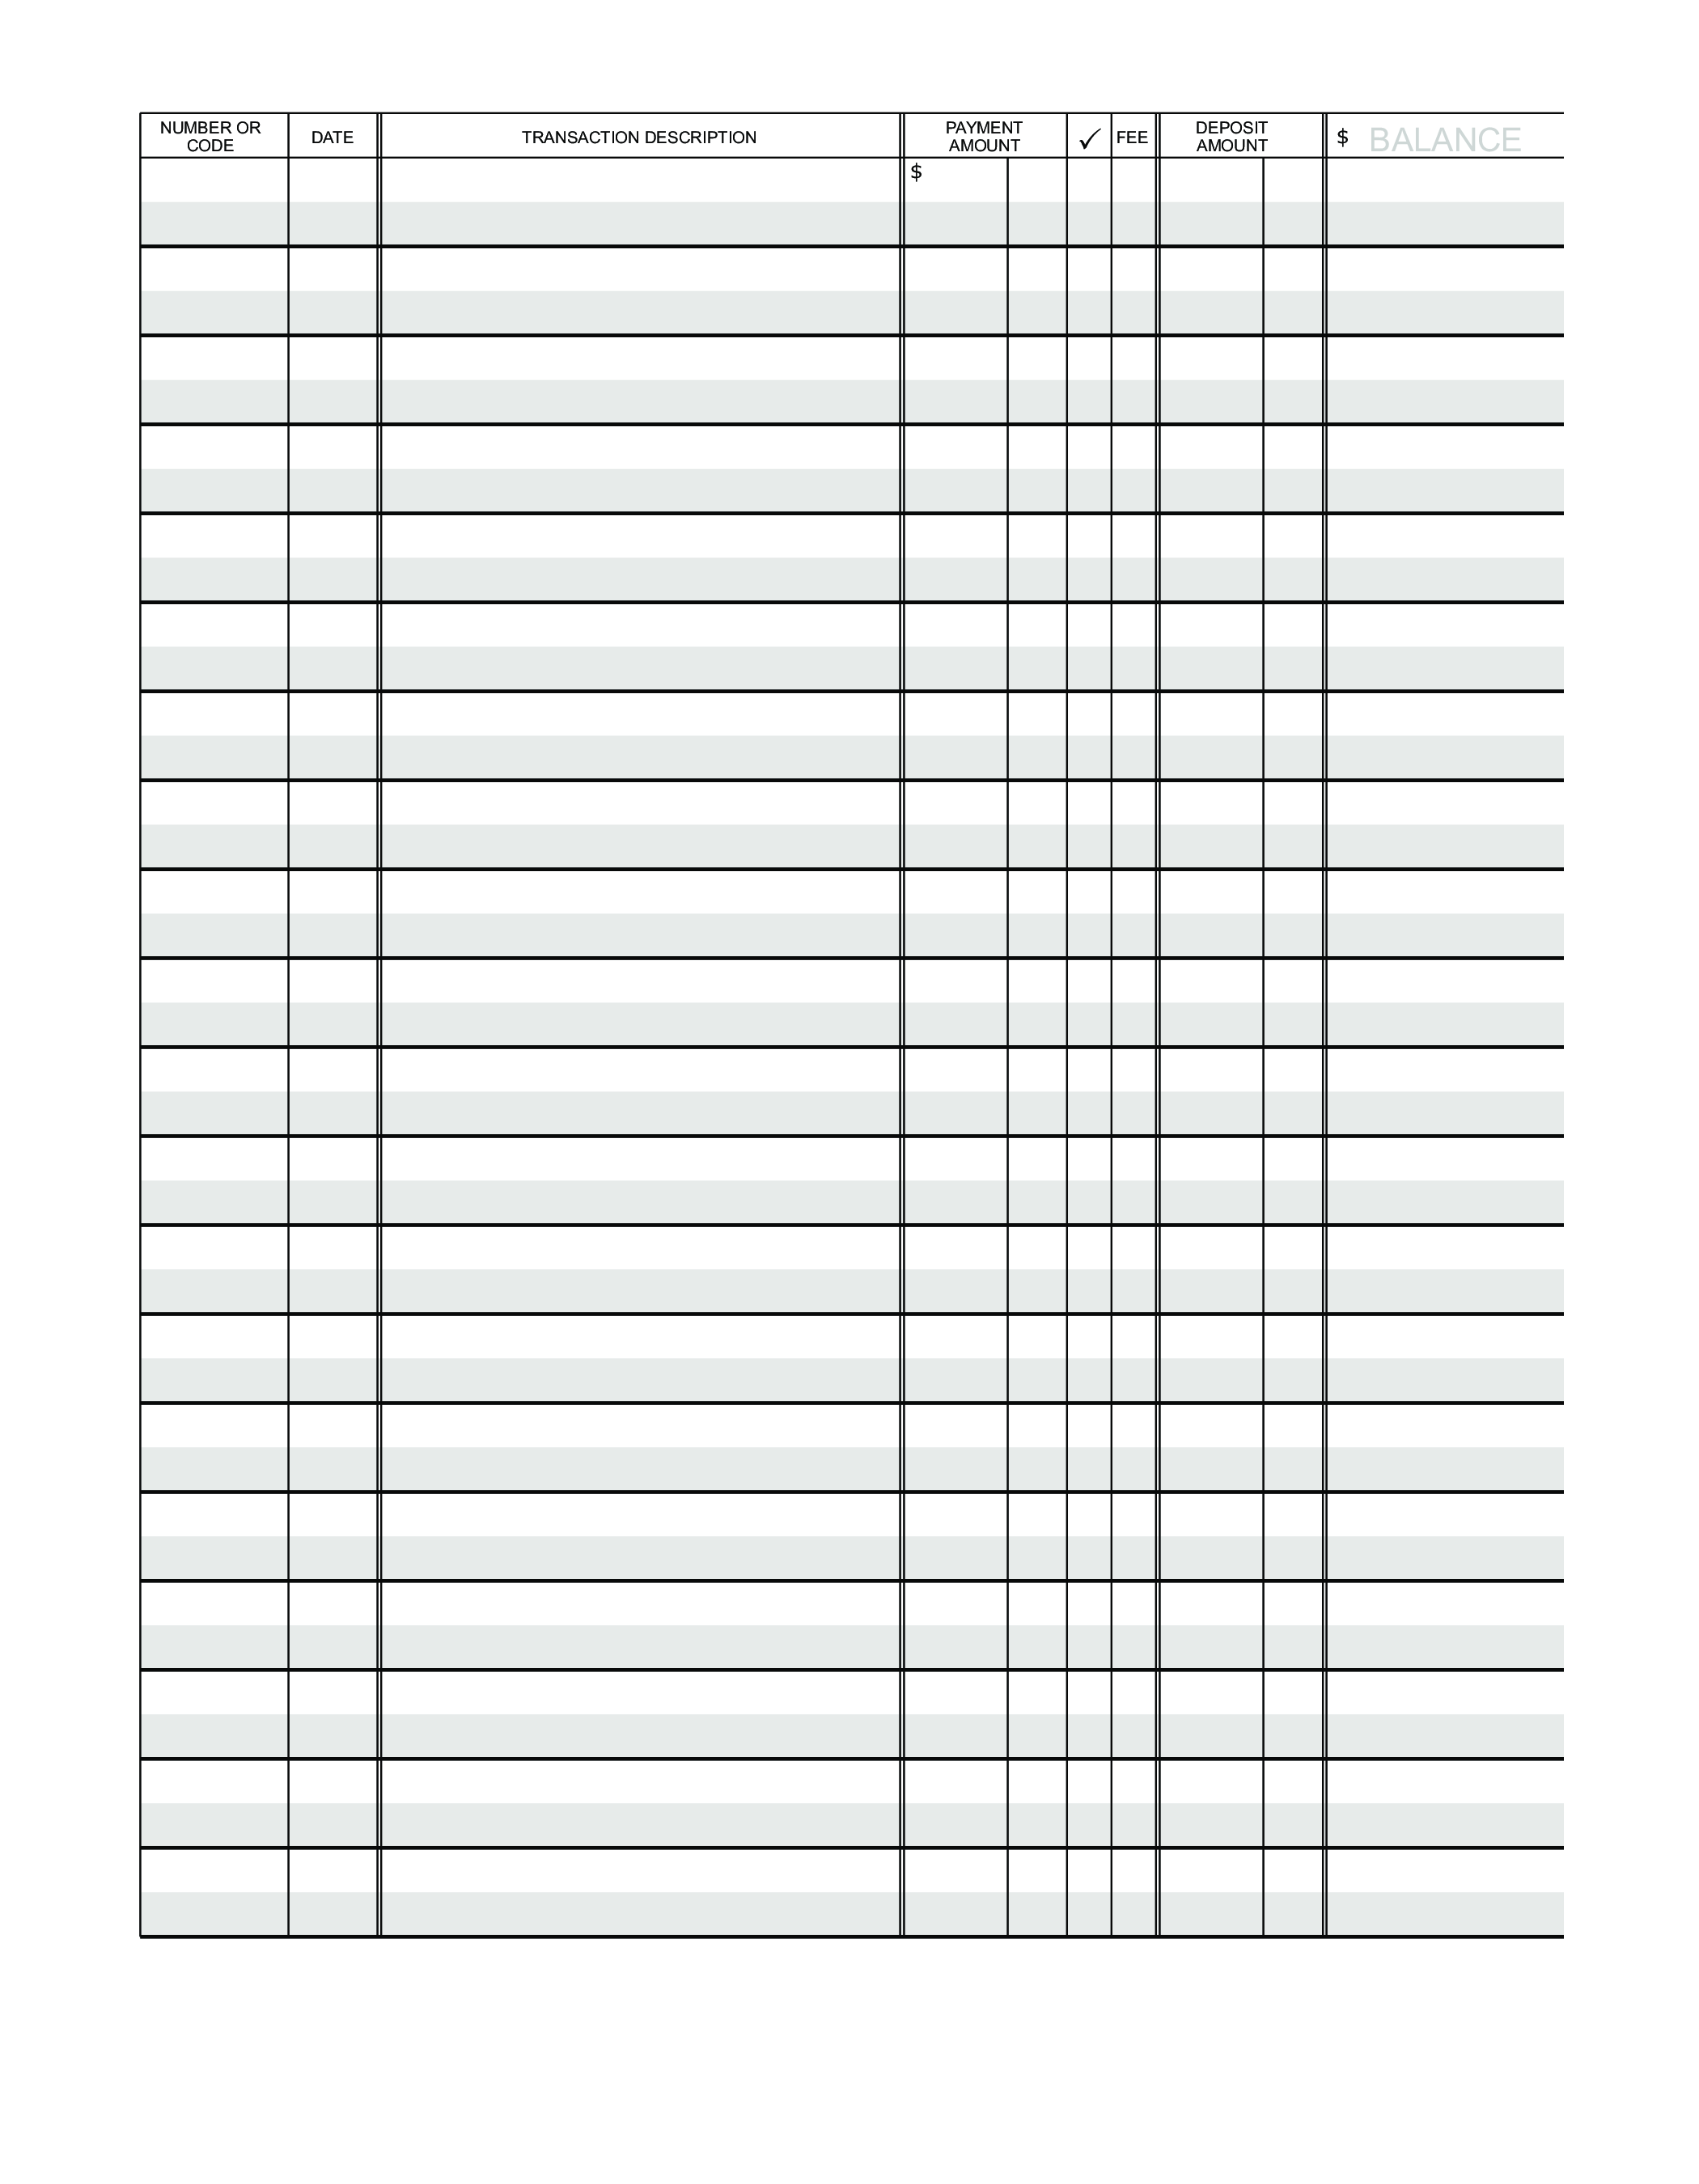 Blank Ledger Paper  Templates at allbusinesstemplates.com Intended For Blank Ledger Template